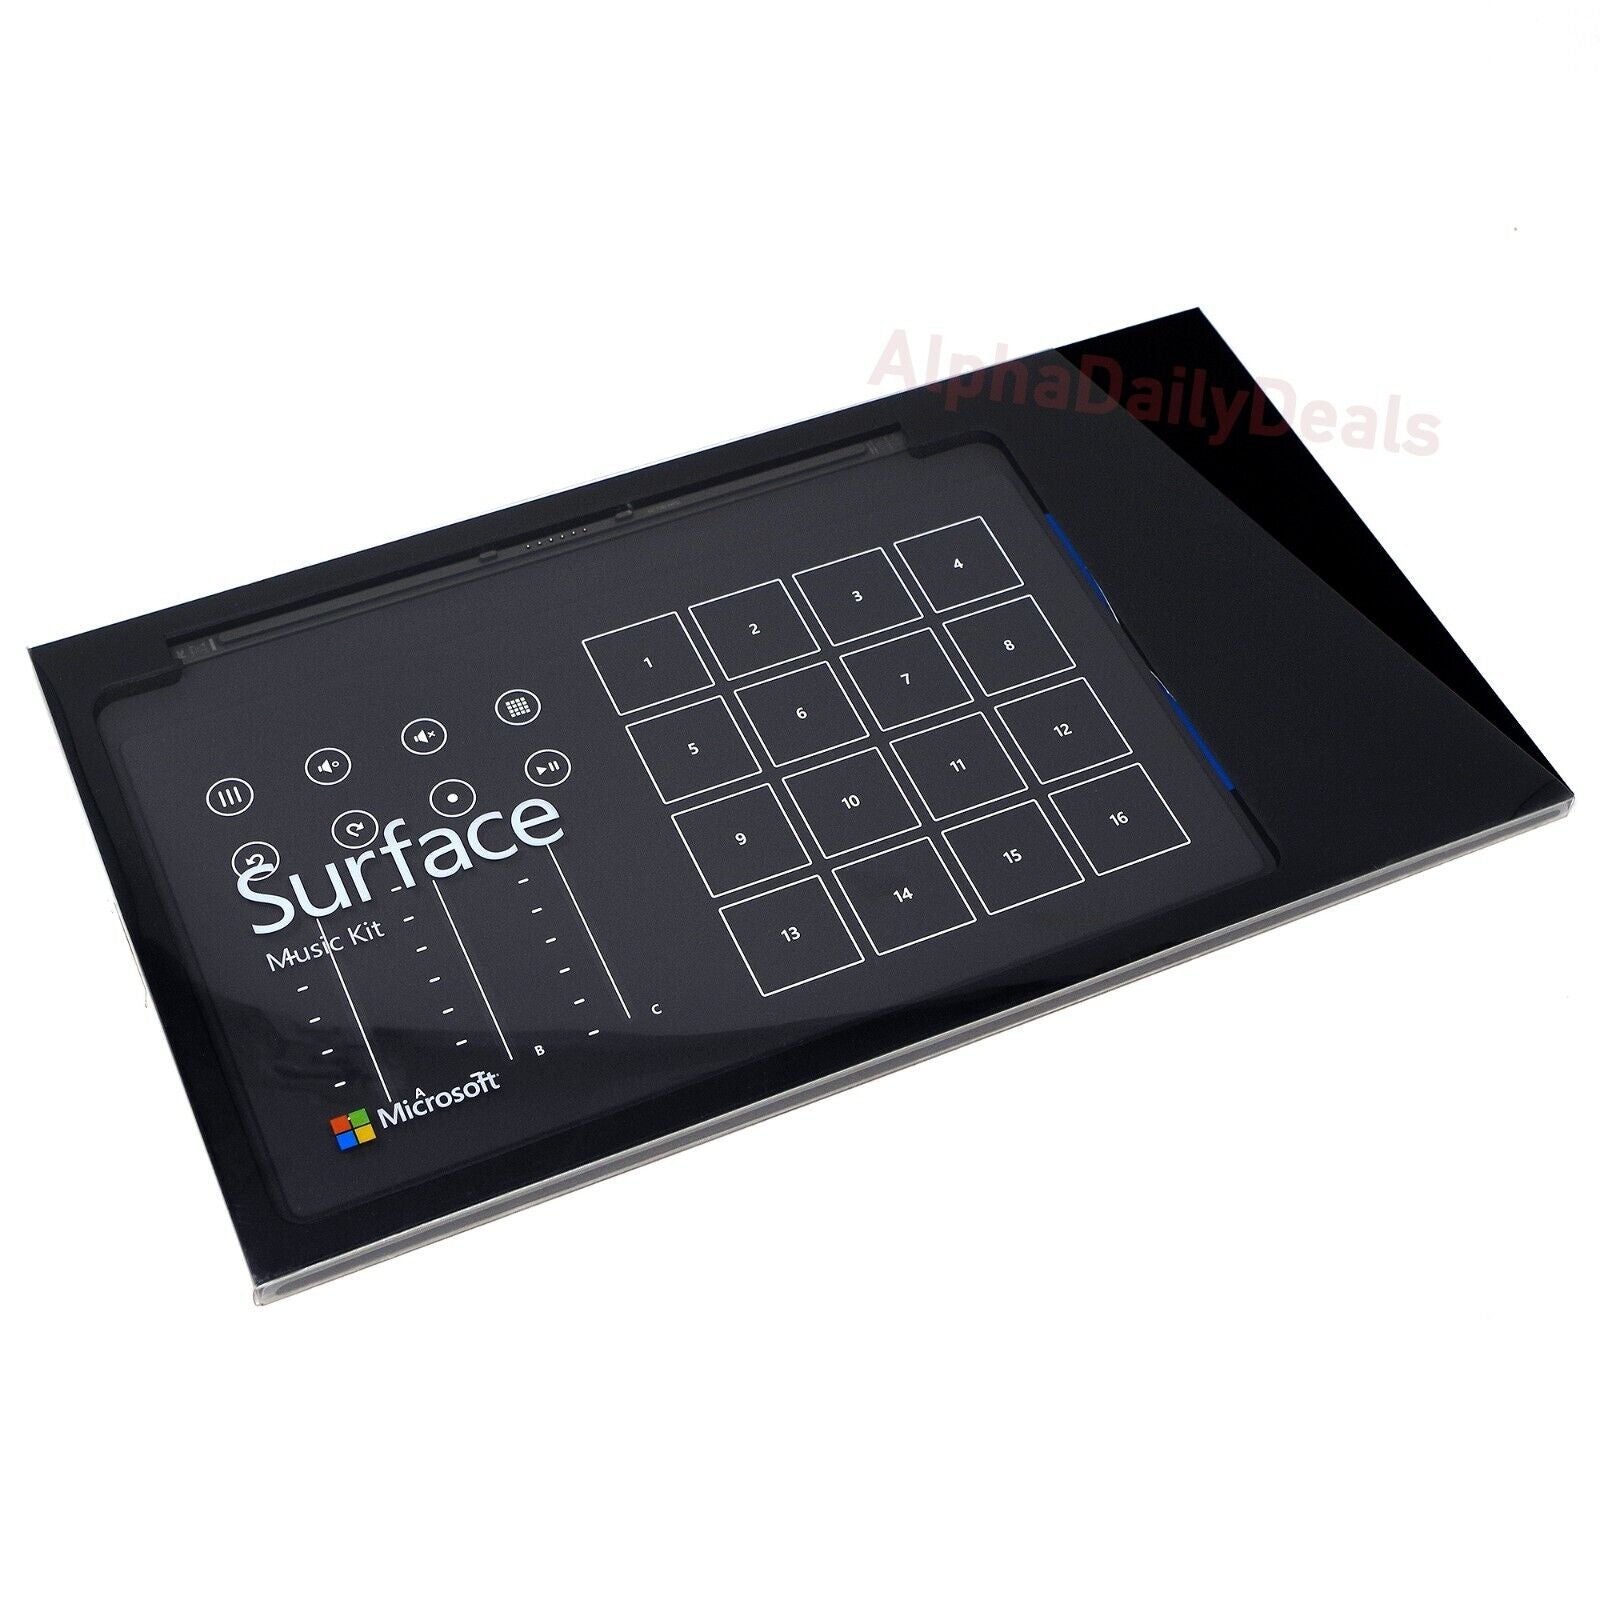 Surface Music Kit - Microsoft Remix Project for Surface Pro 2